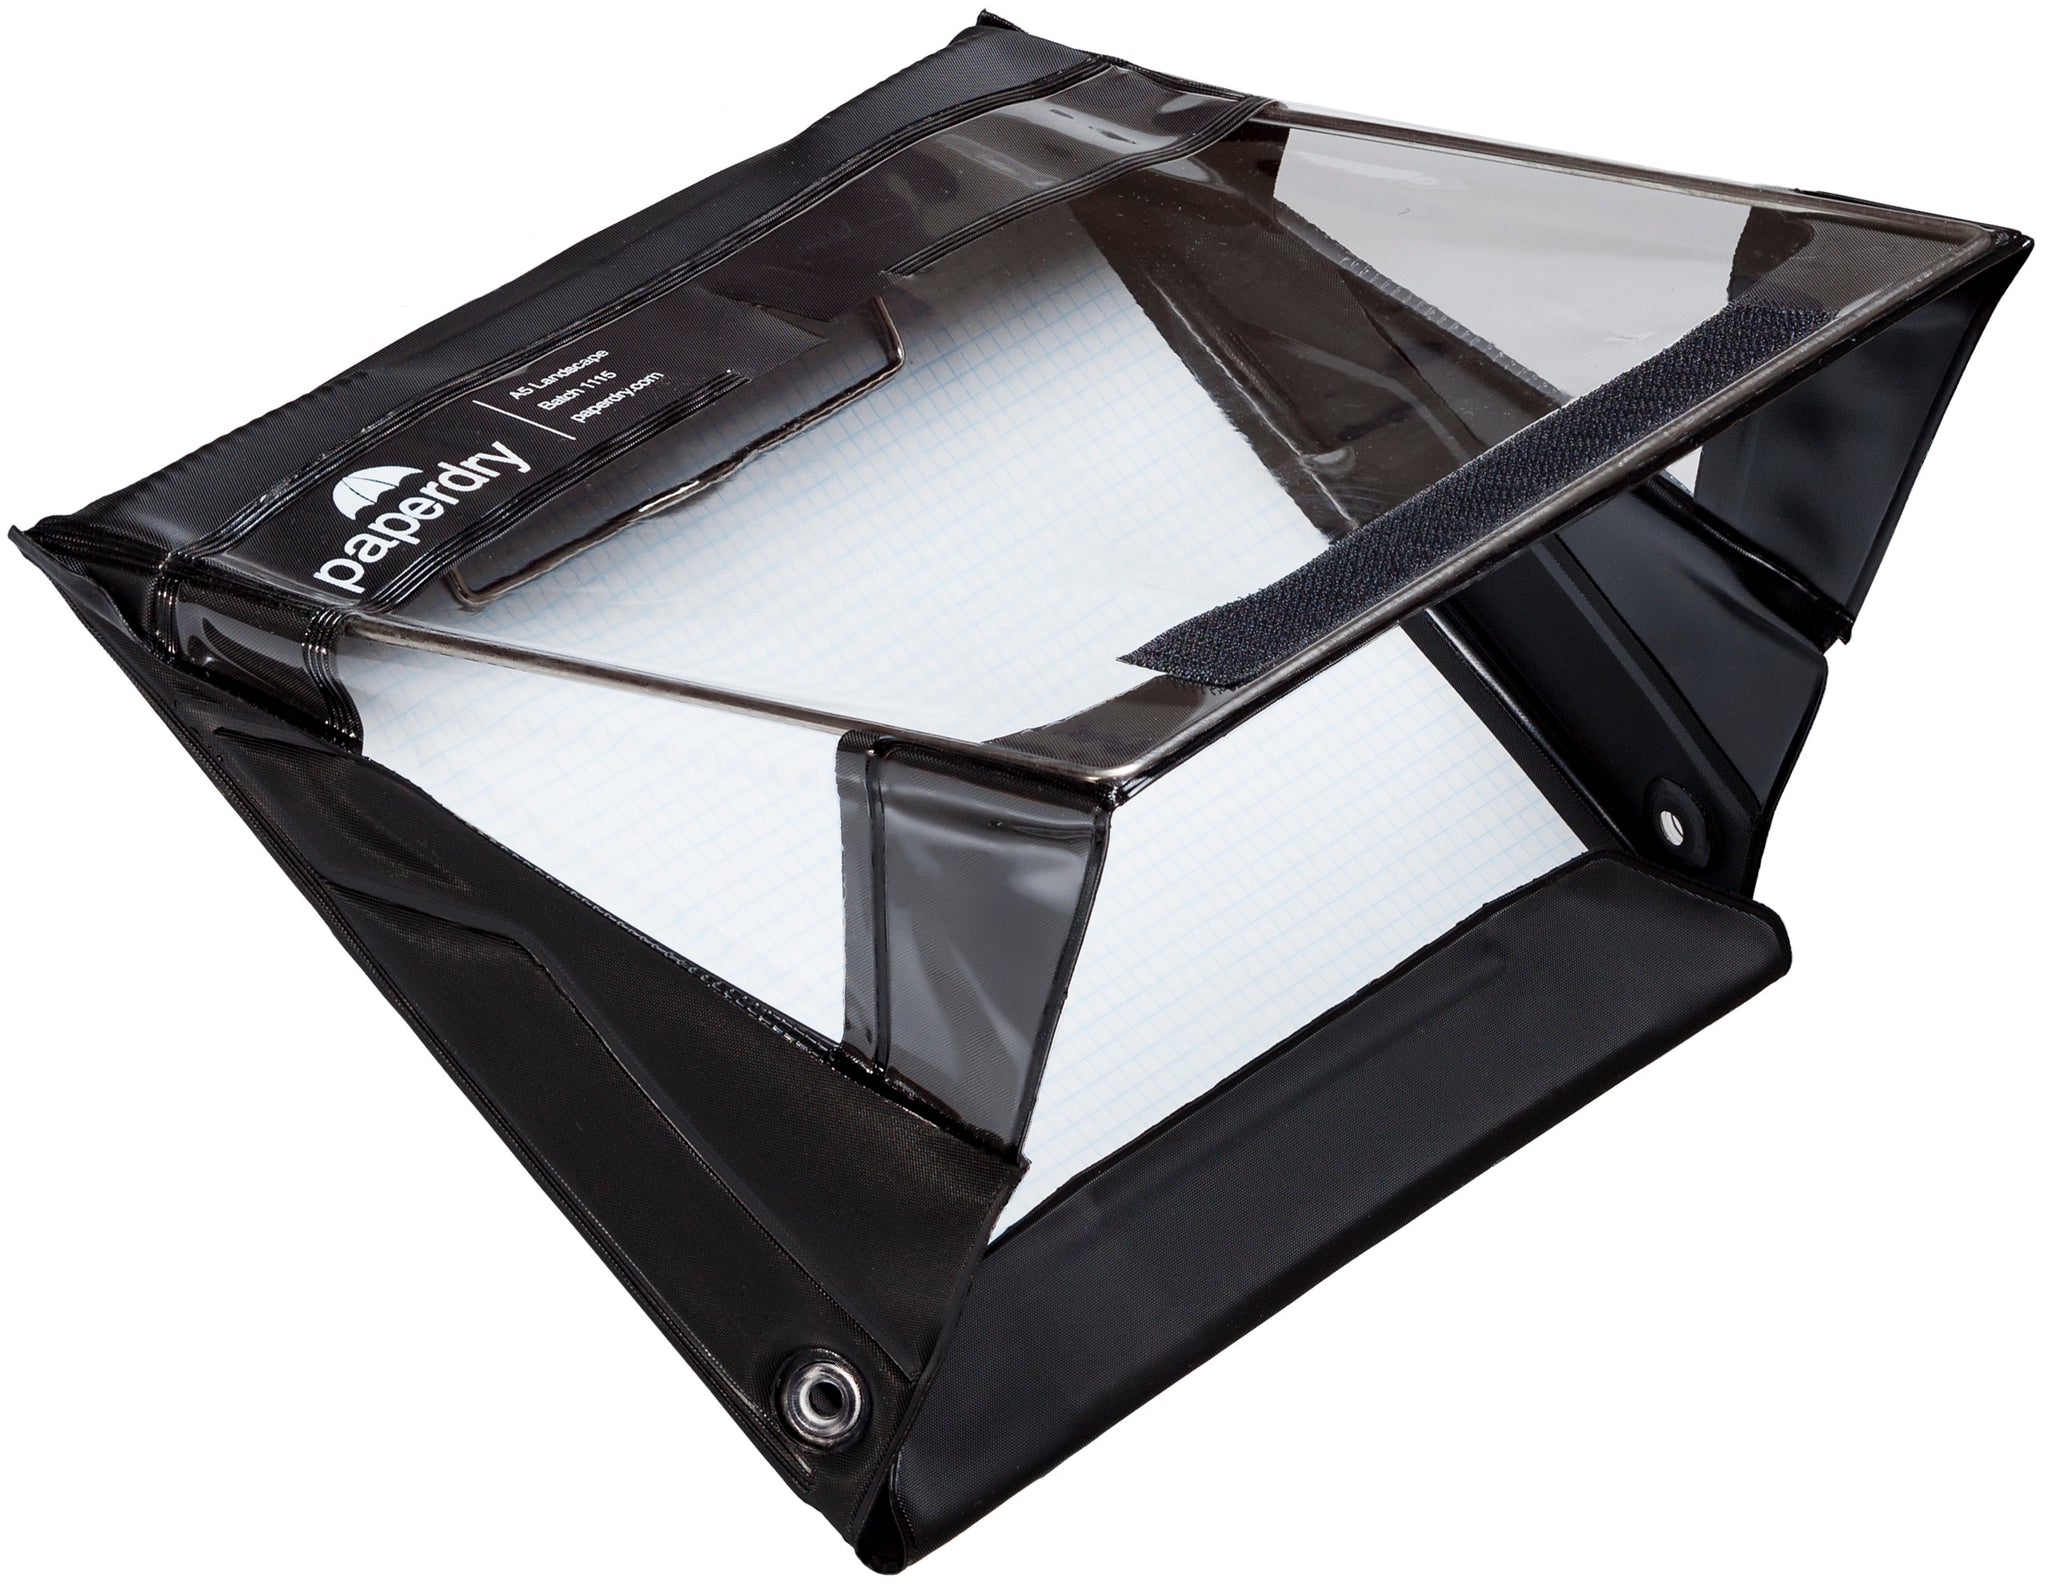 An A5 waterproof clipboard, in black, with extra thick PVC